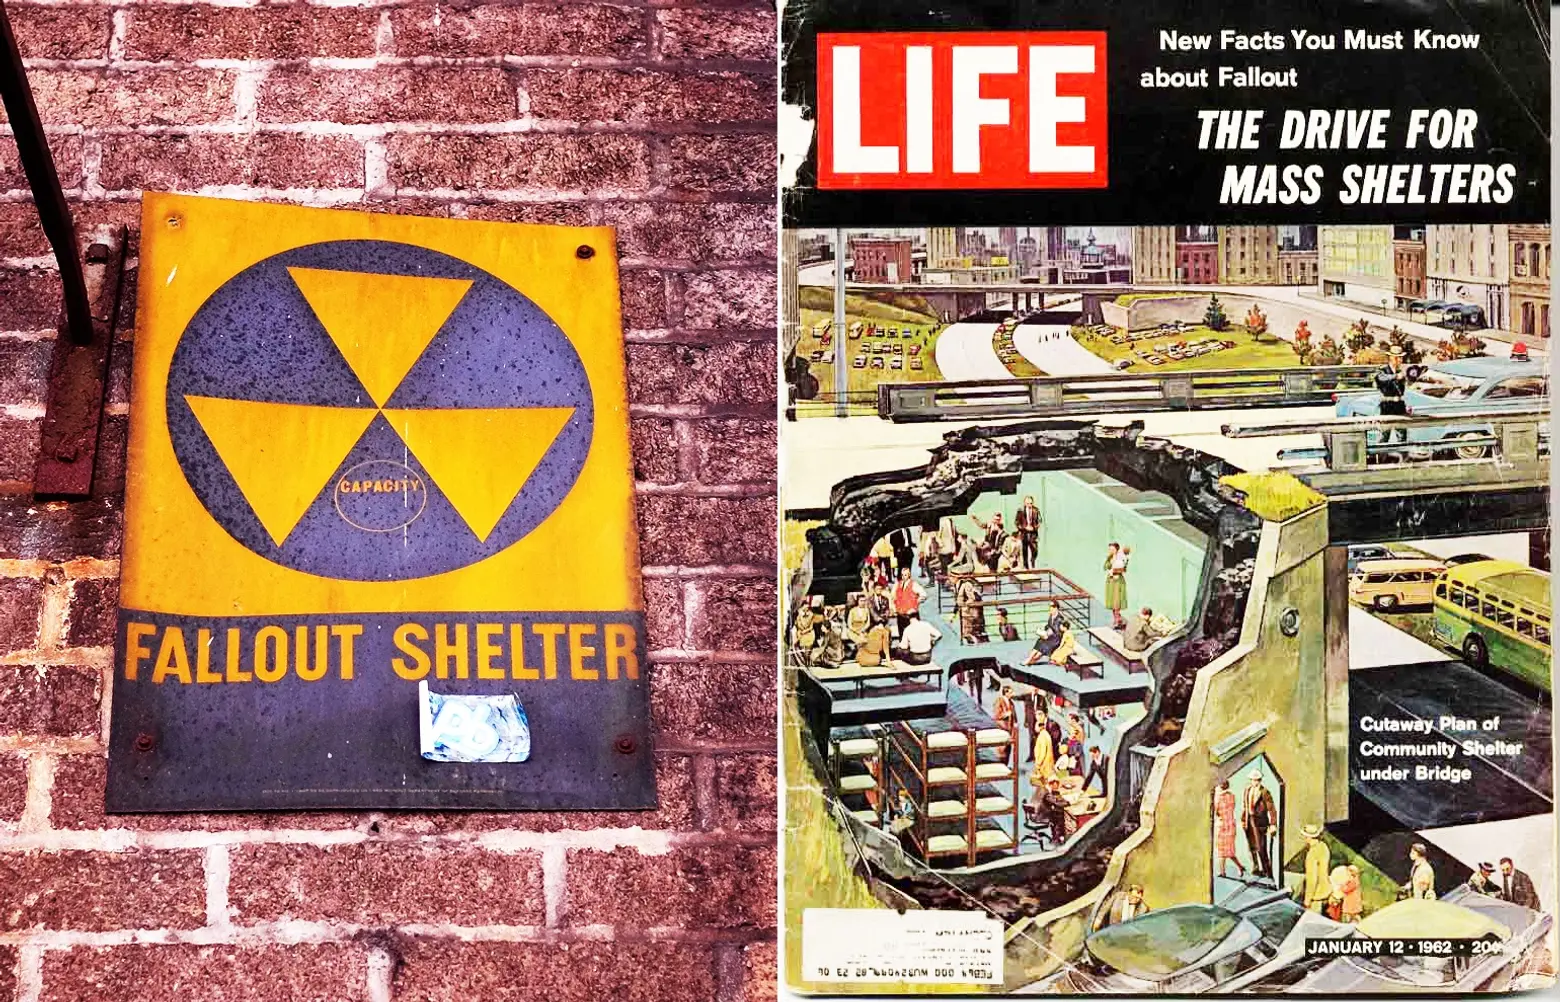 Fallout Shelters: Why some New Yorkers never planned to evacuate after a nuclear disaster